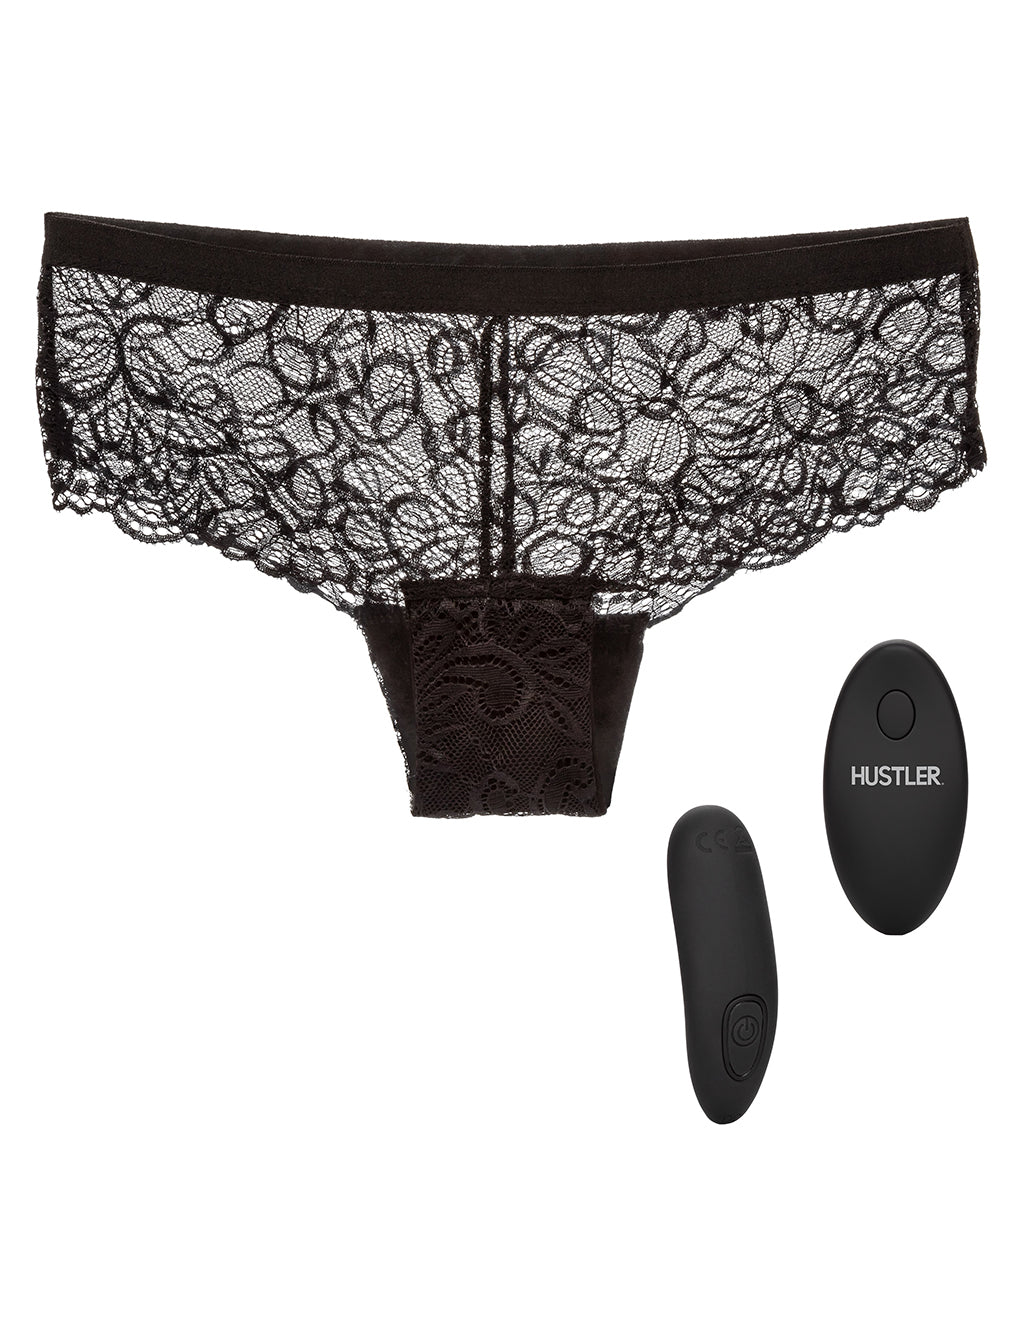 HUSTLER® Playthings Remote Control Panty- Front